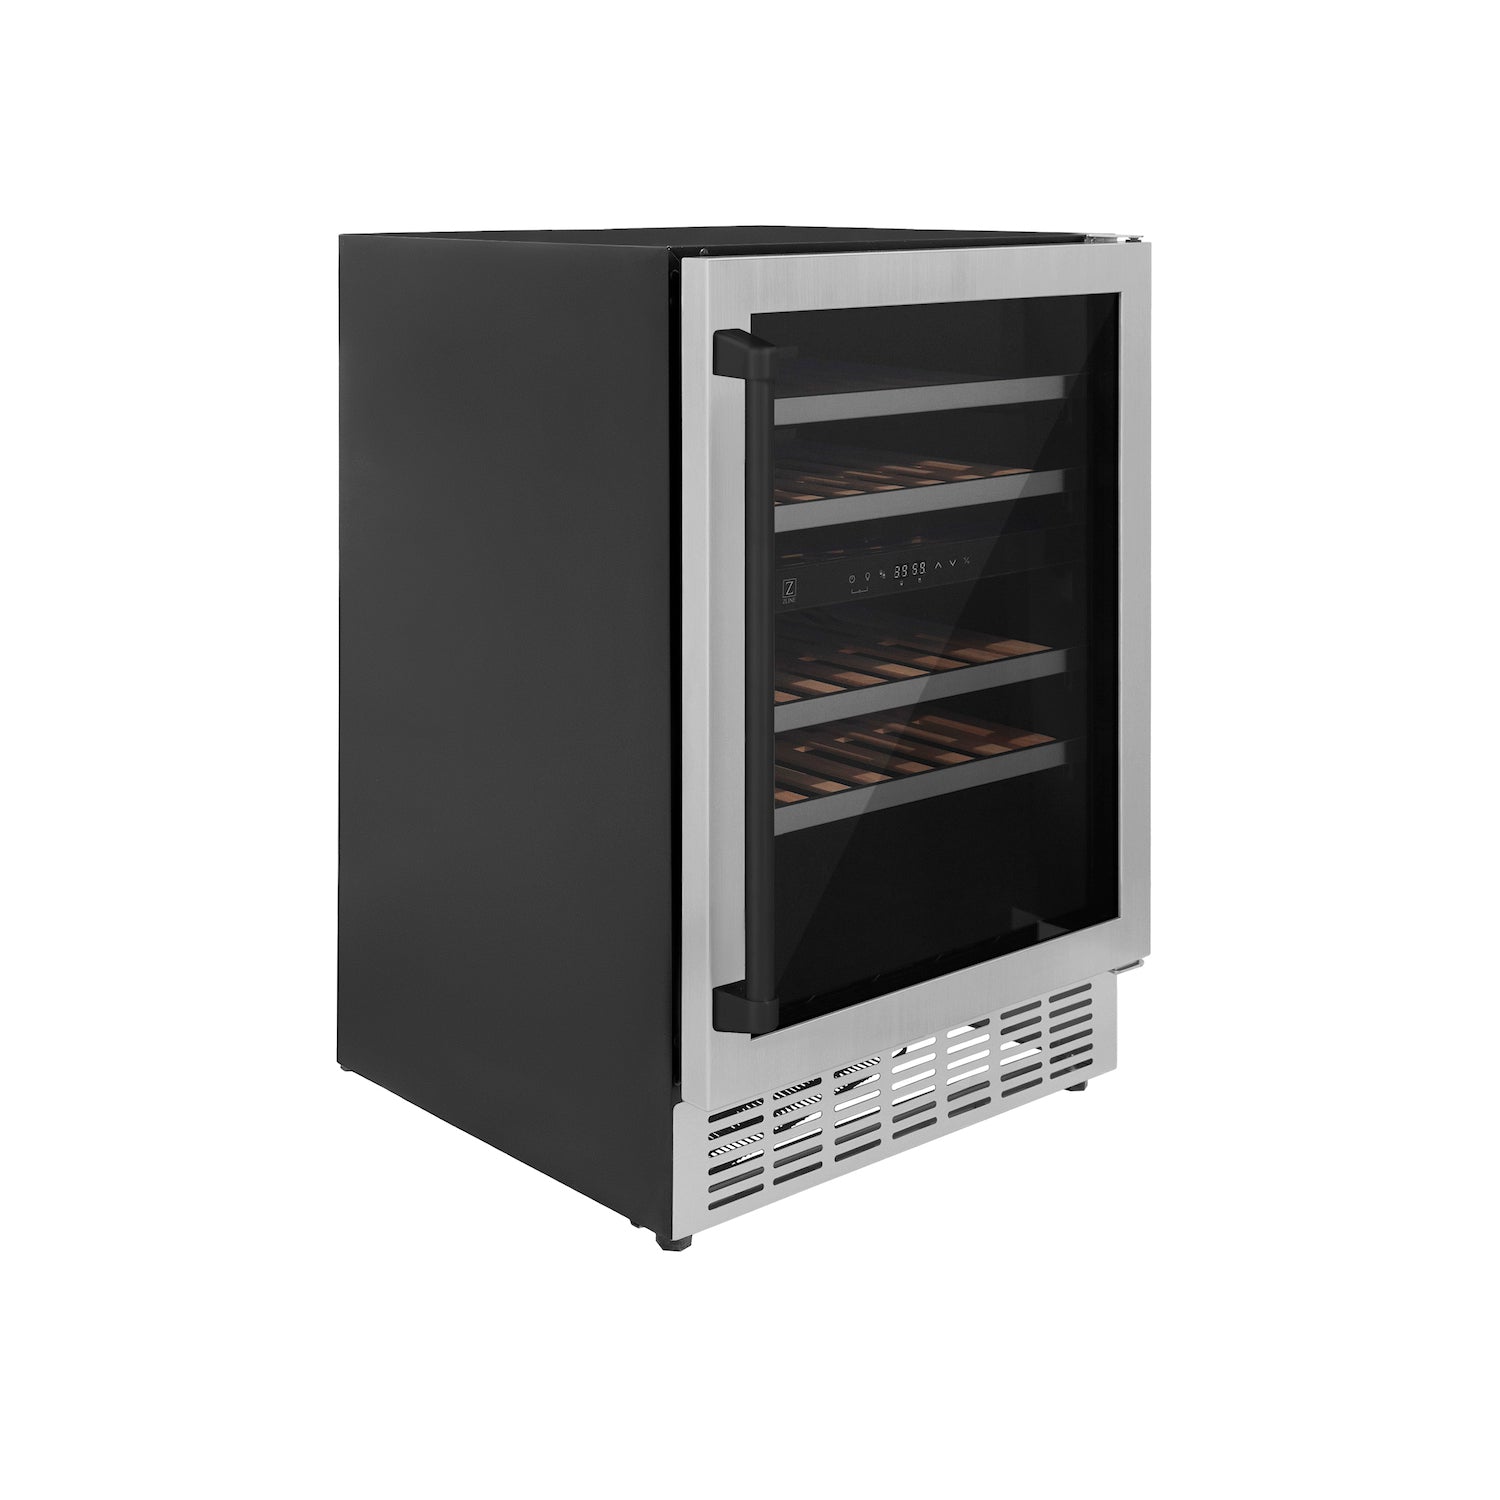 ZLINE Autograph Edition 24 in. Wine Cooler with Matte Black accents reverse side with door closed.